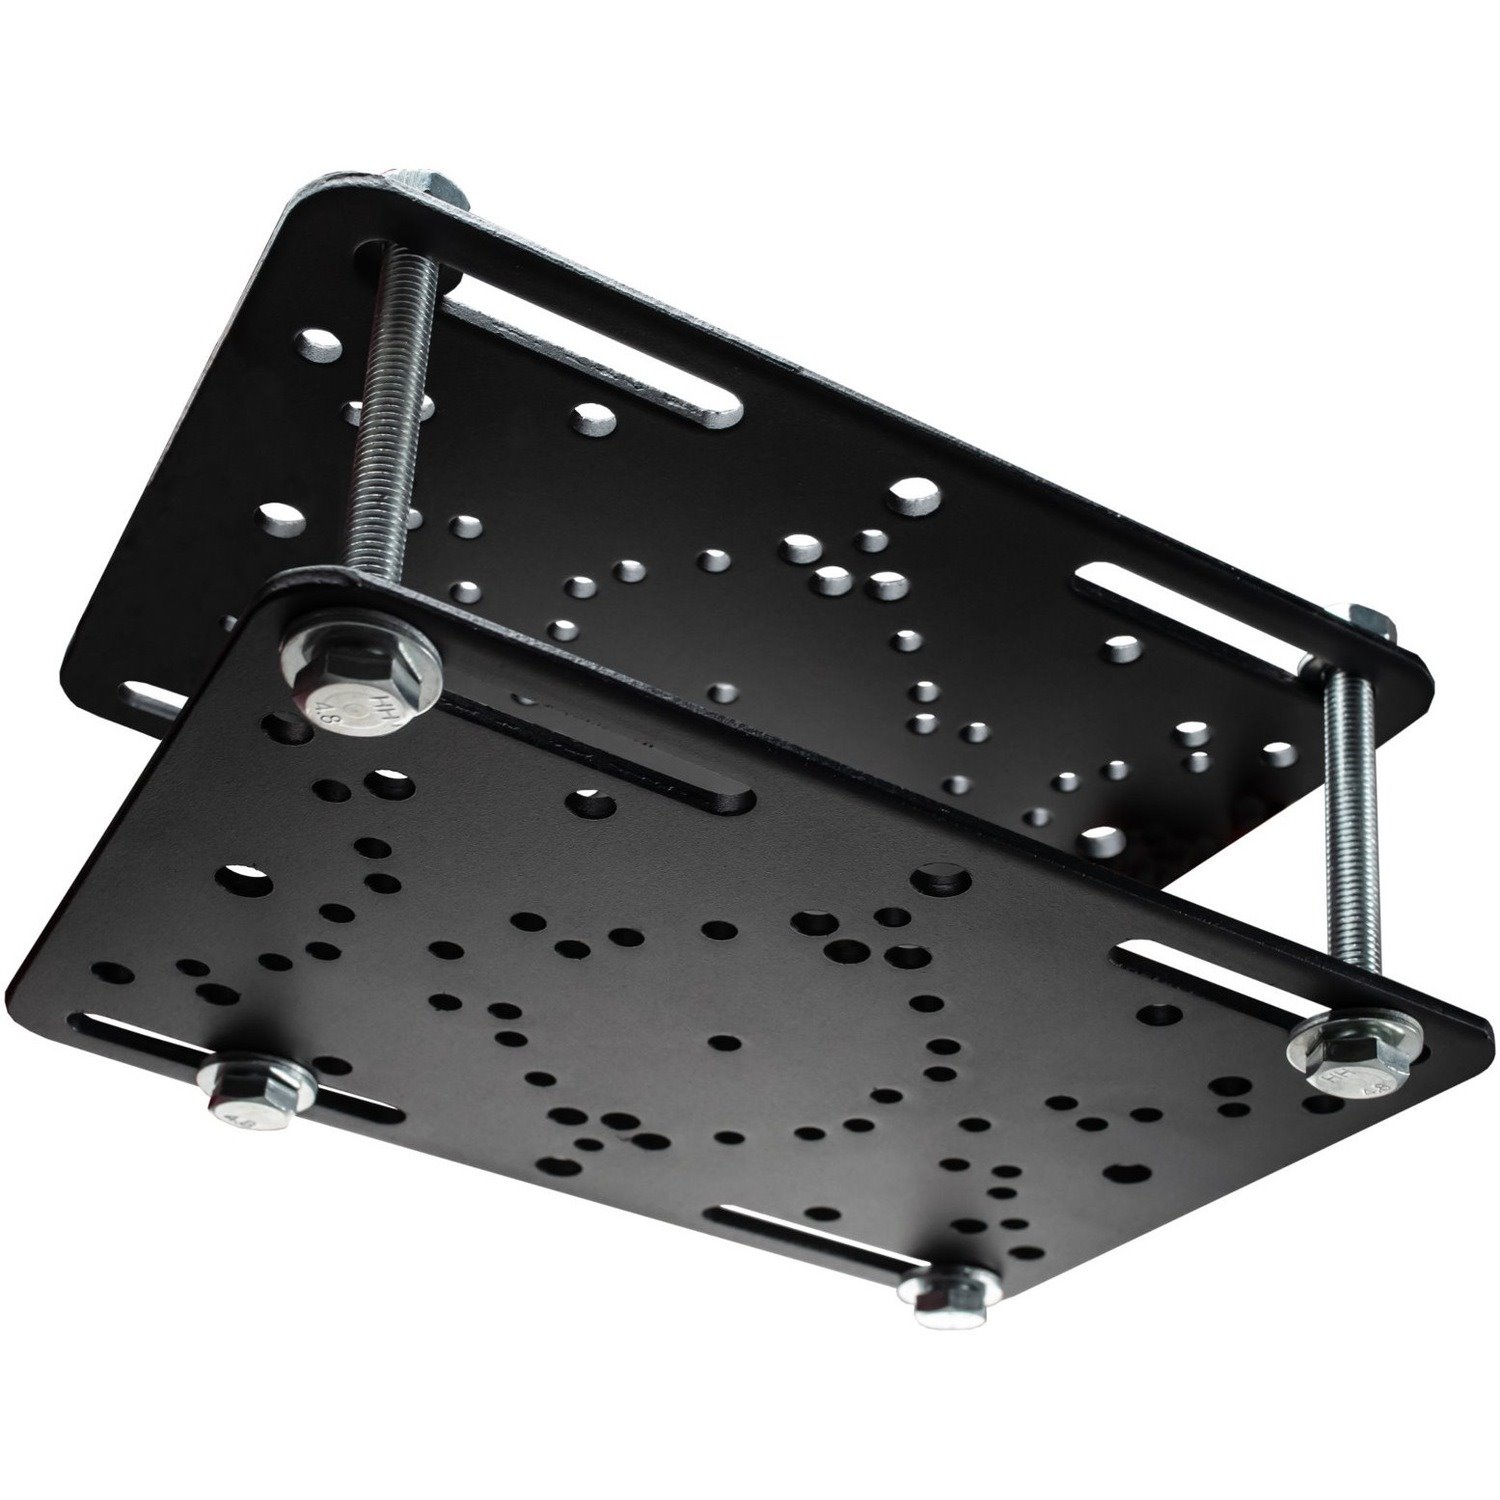 CTA Digital Mounting Plate for Tablet